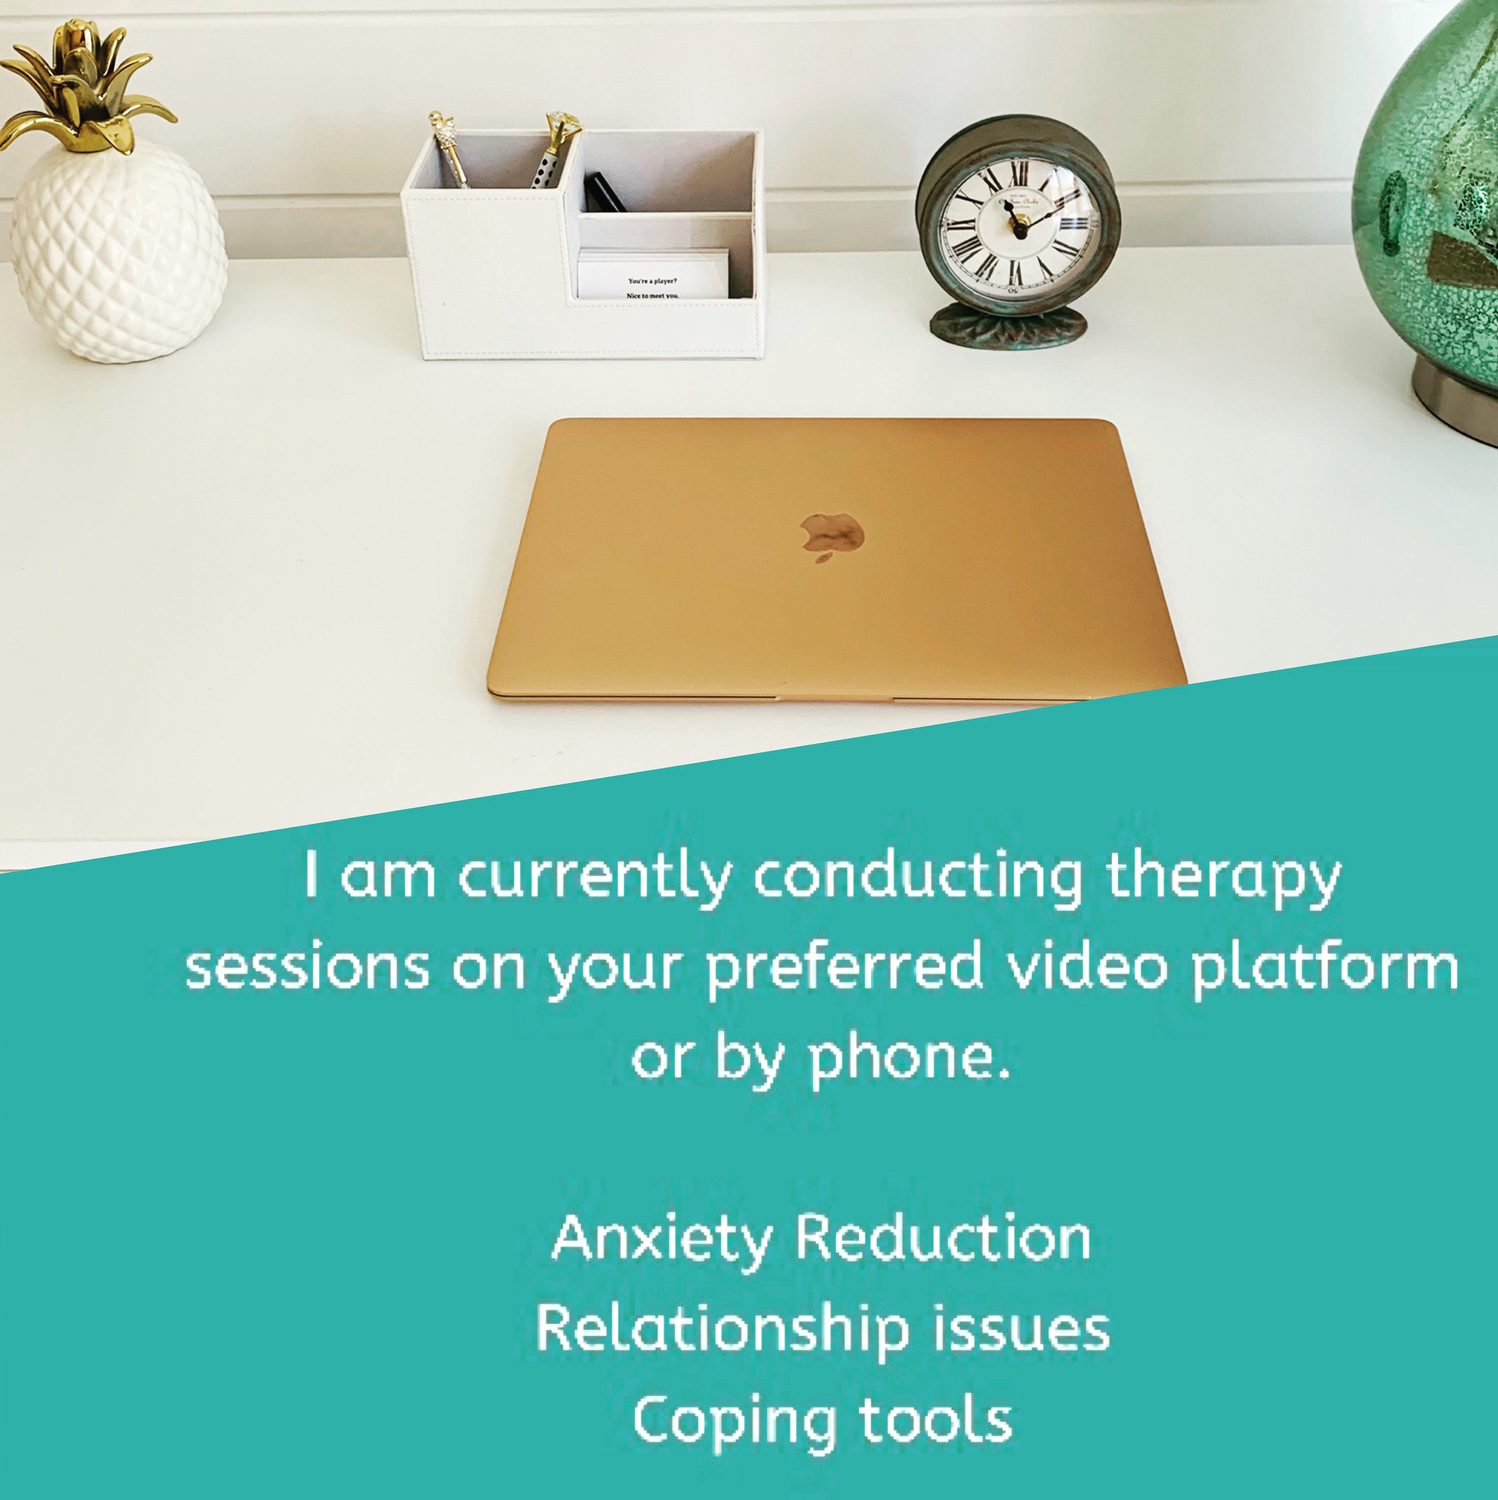 Gallery Photo of online therapy